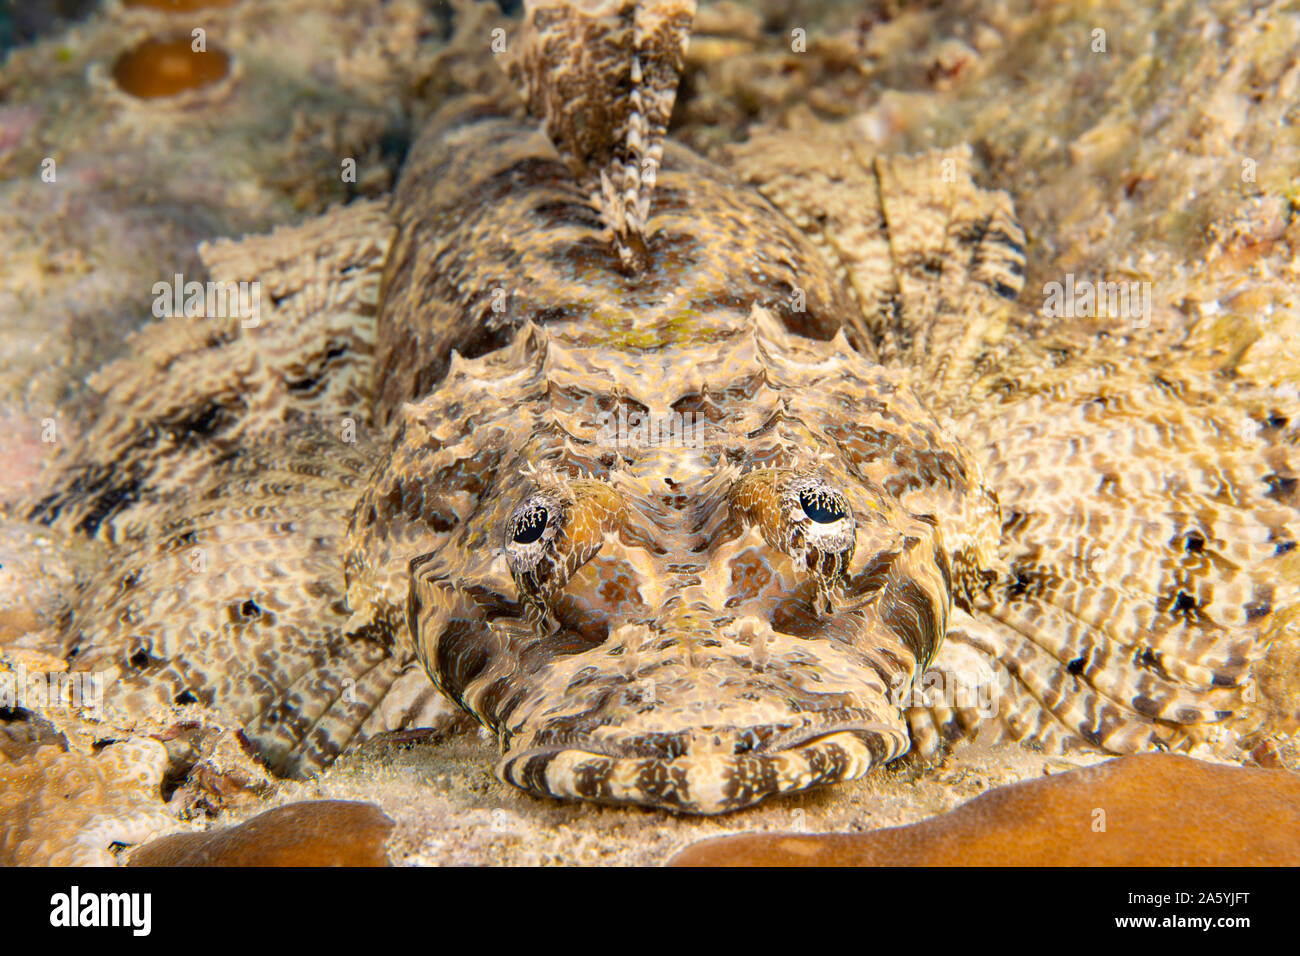 A face on look at a crocodile fish, Cymbacephalus beauforti, on a reef off the island of Yap, Micronesia. Stock Photo